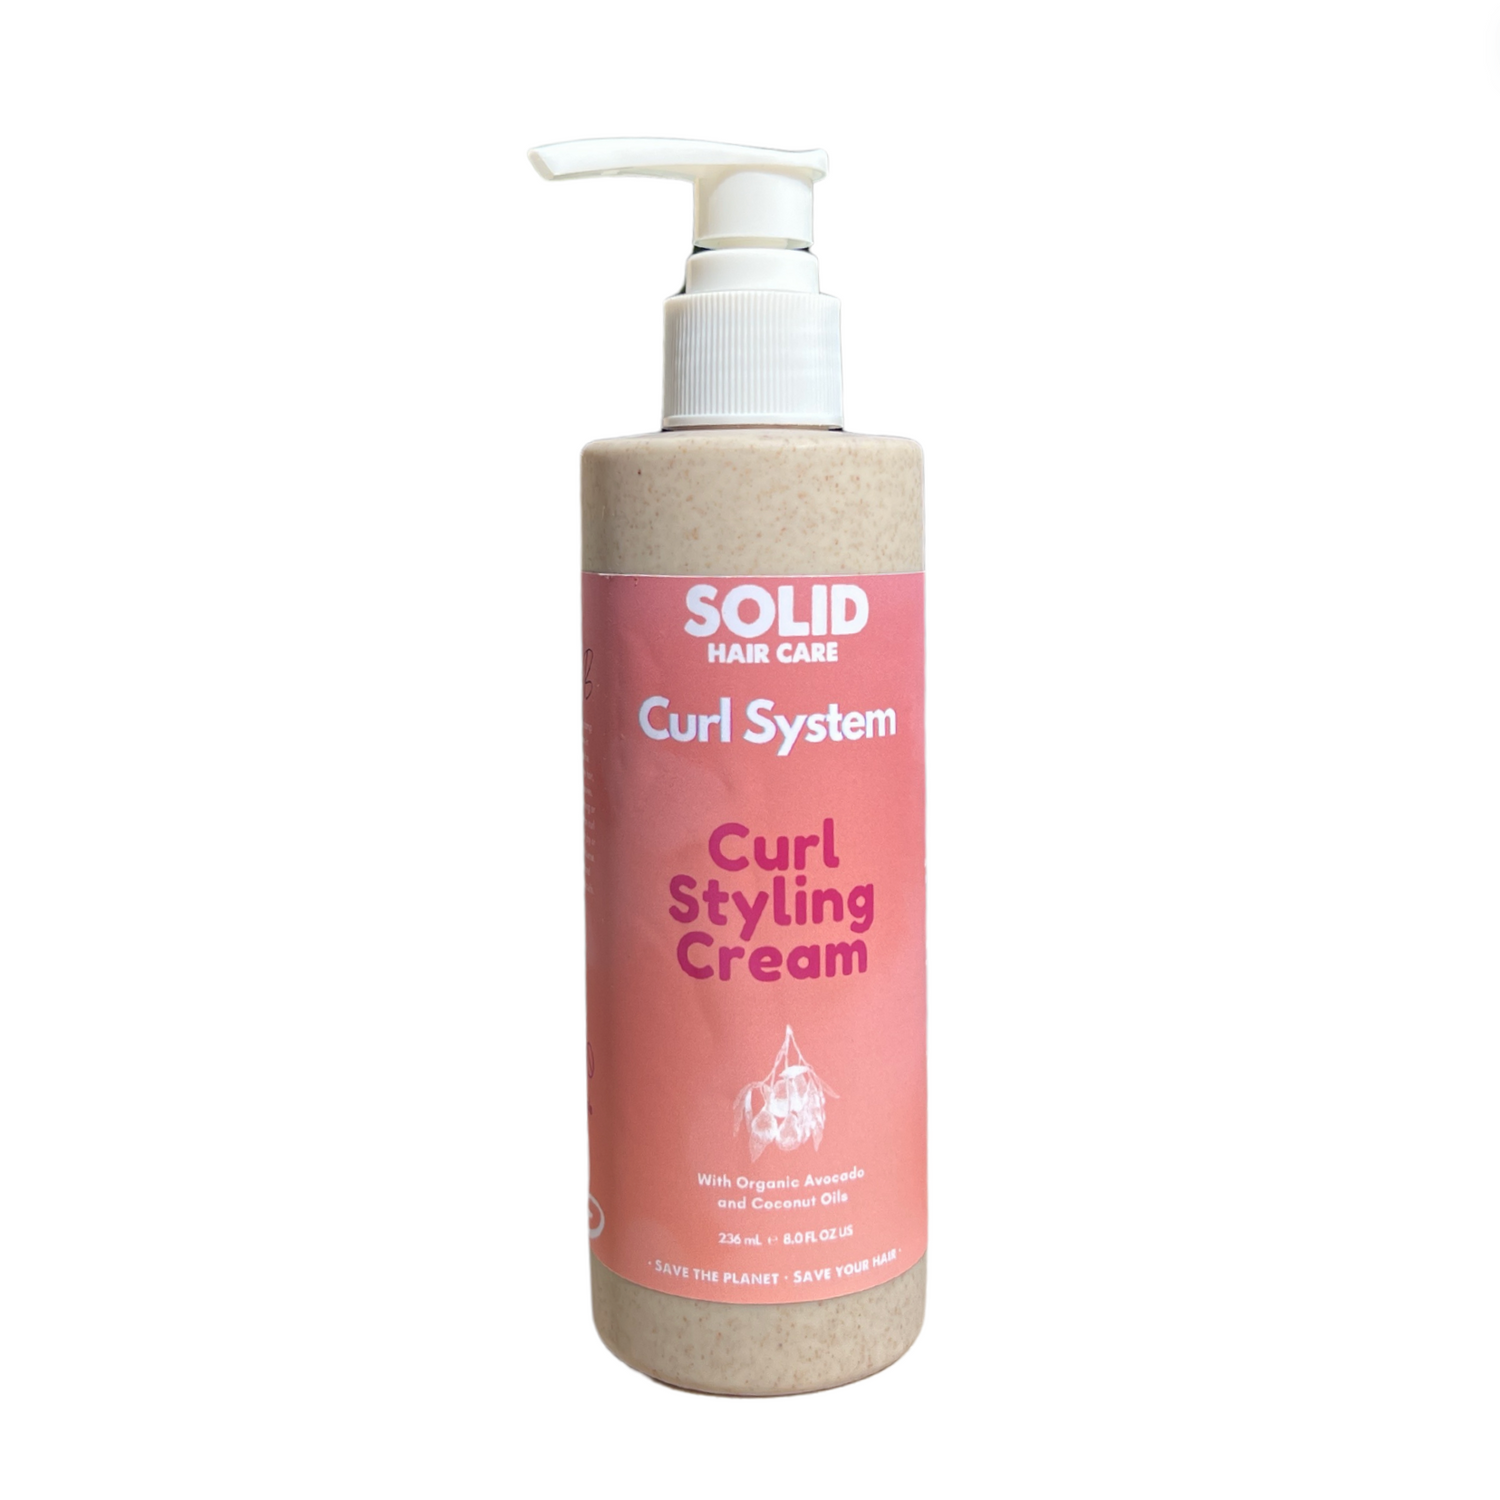 Curl Styling Cream - The Curl System